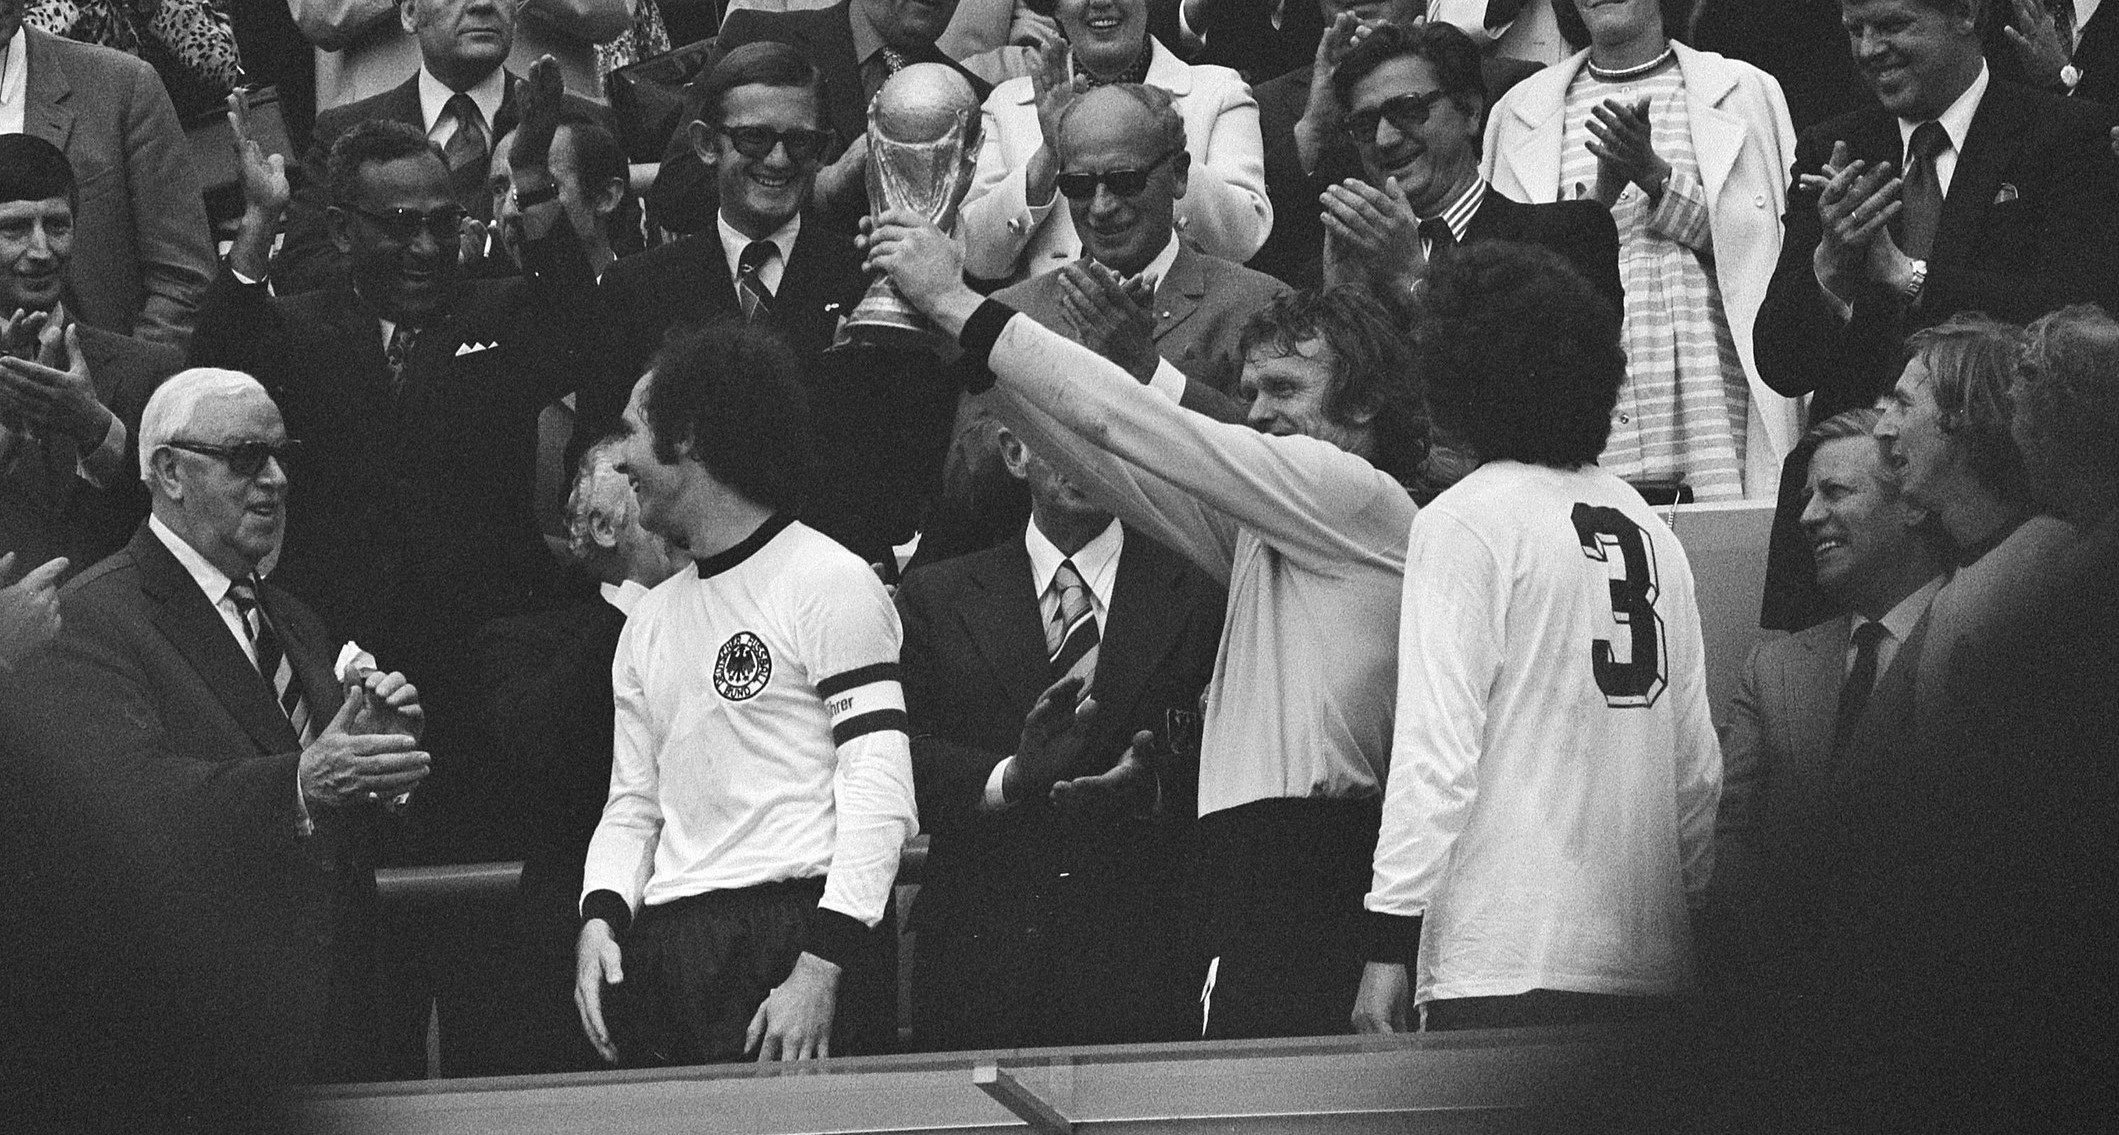 The West Germany team, winner of the 1974 FIFA World Cup